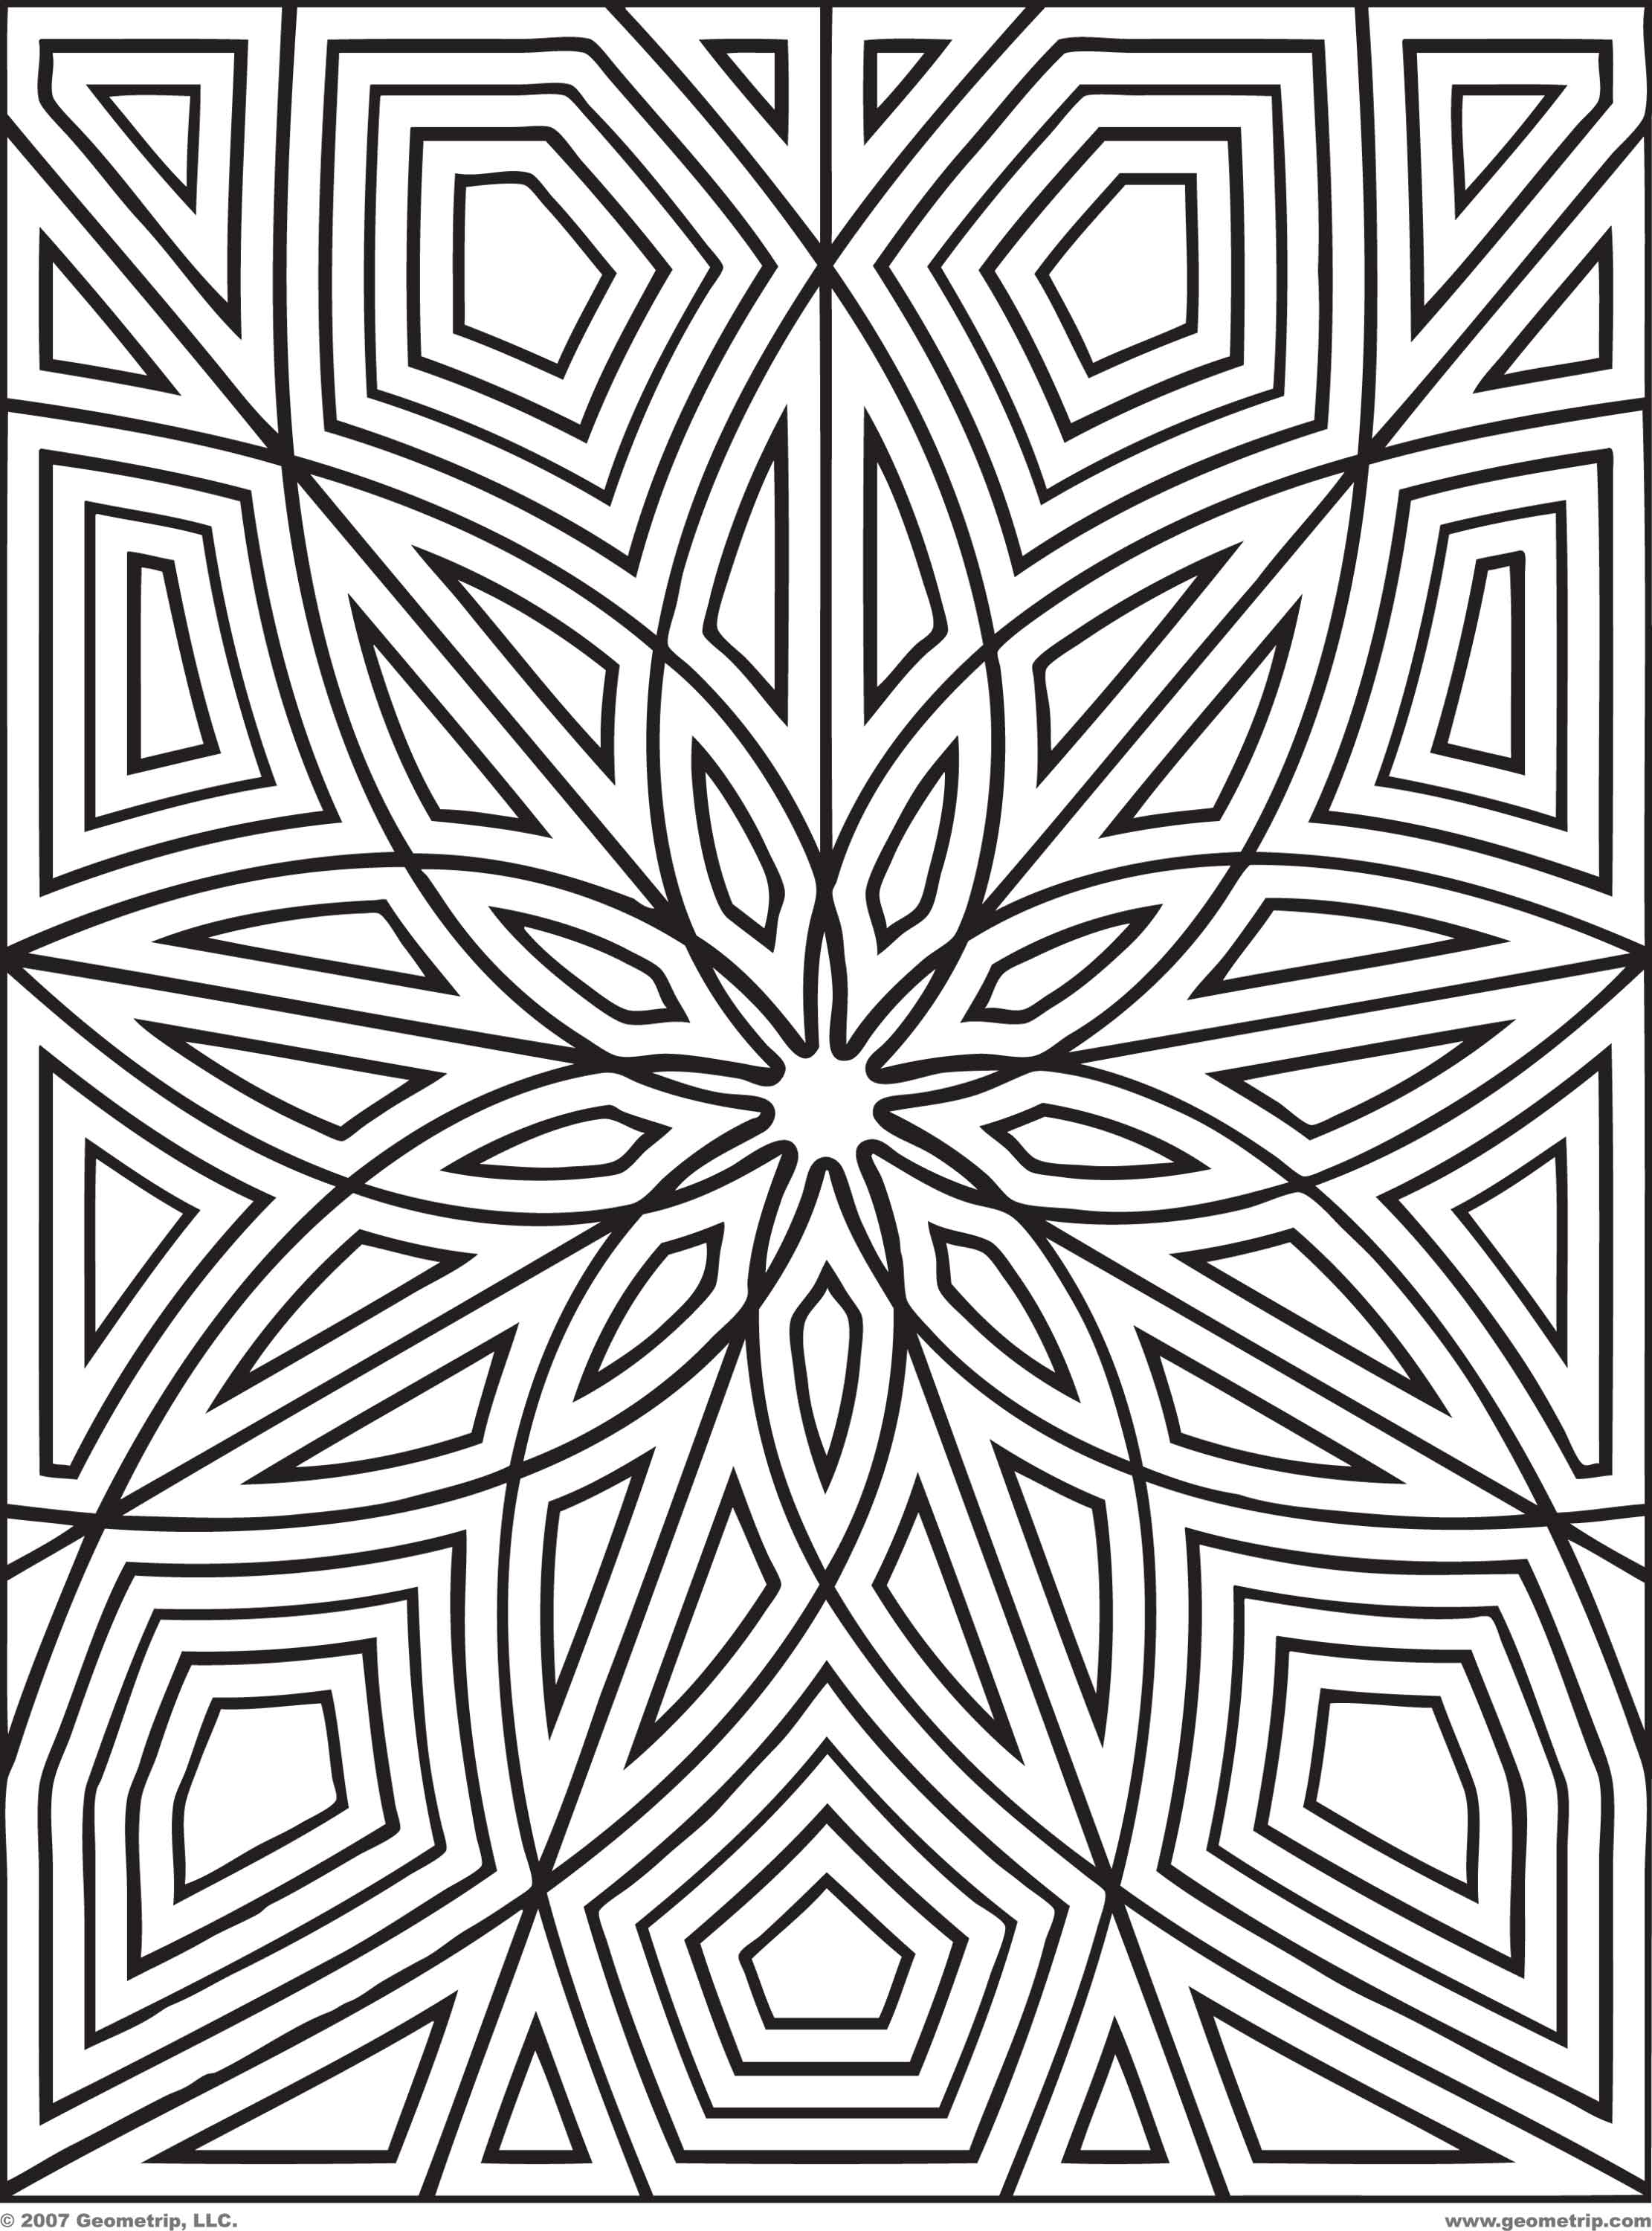 Geometric Design Coloring Pages - Coloring Stylizr